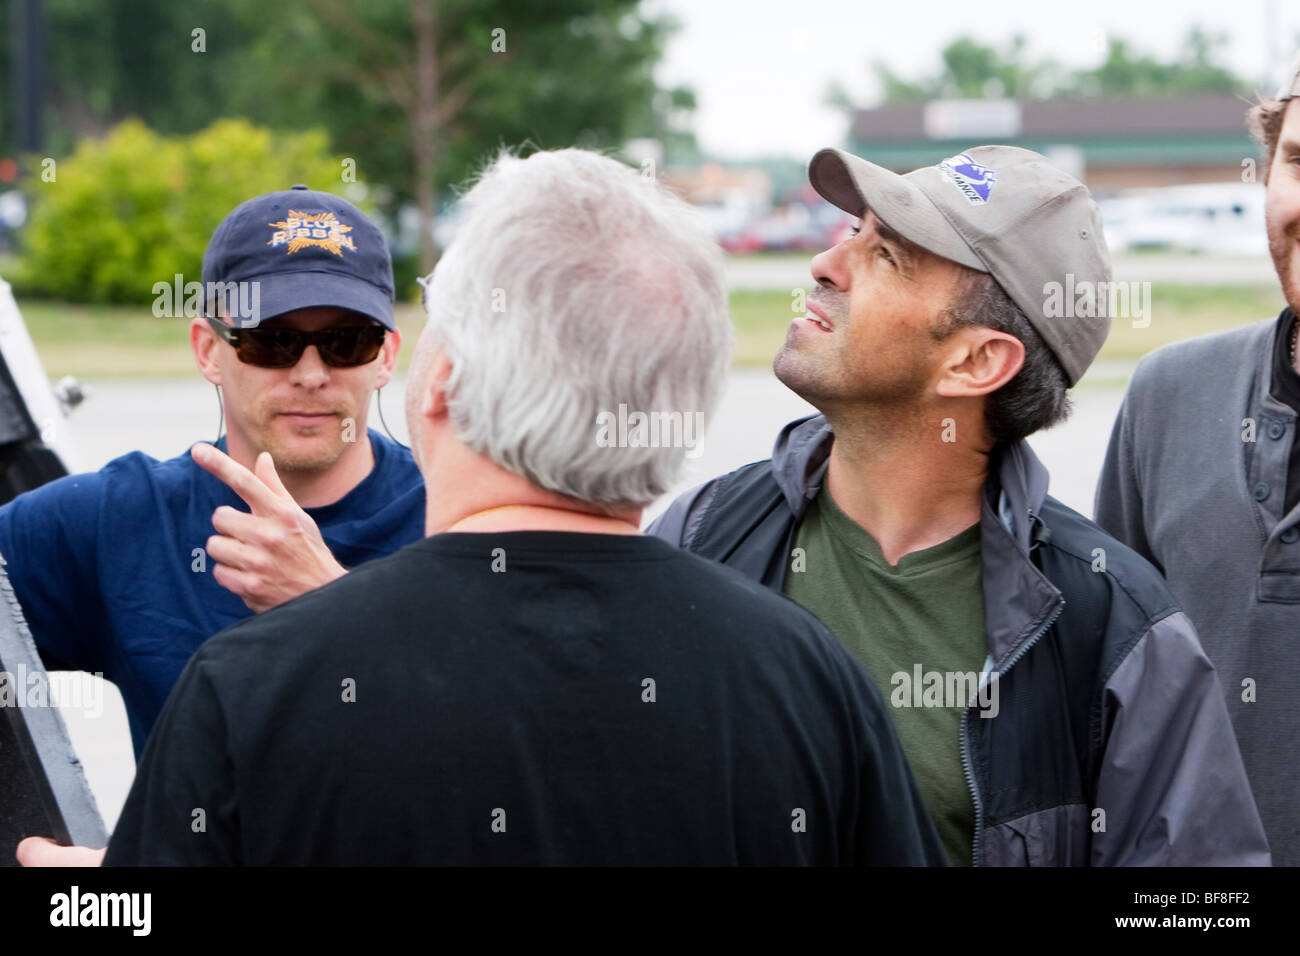 Josh Wurman of the Center for Severe Weather Research speaks to storm chasers Sean Casey and Ronan Nagle in Kearney, Nebraska. Stock Photo